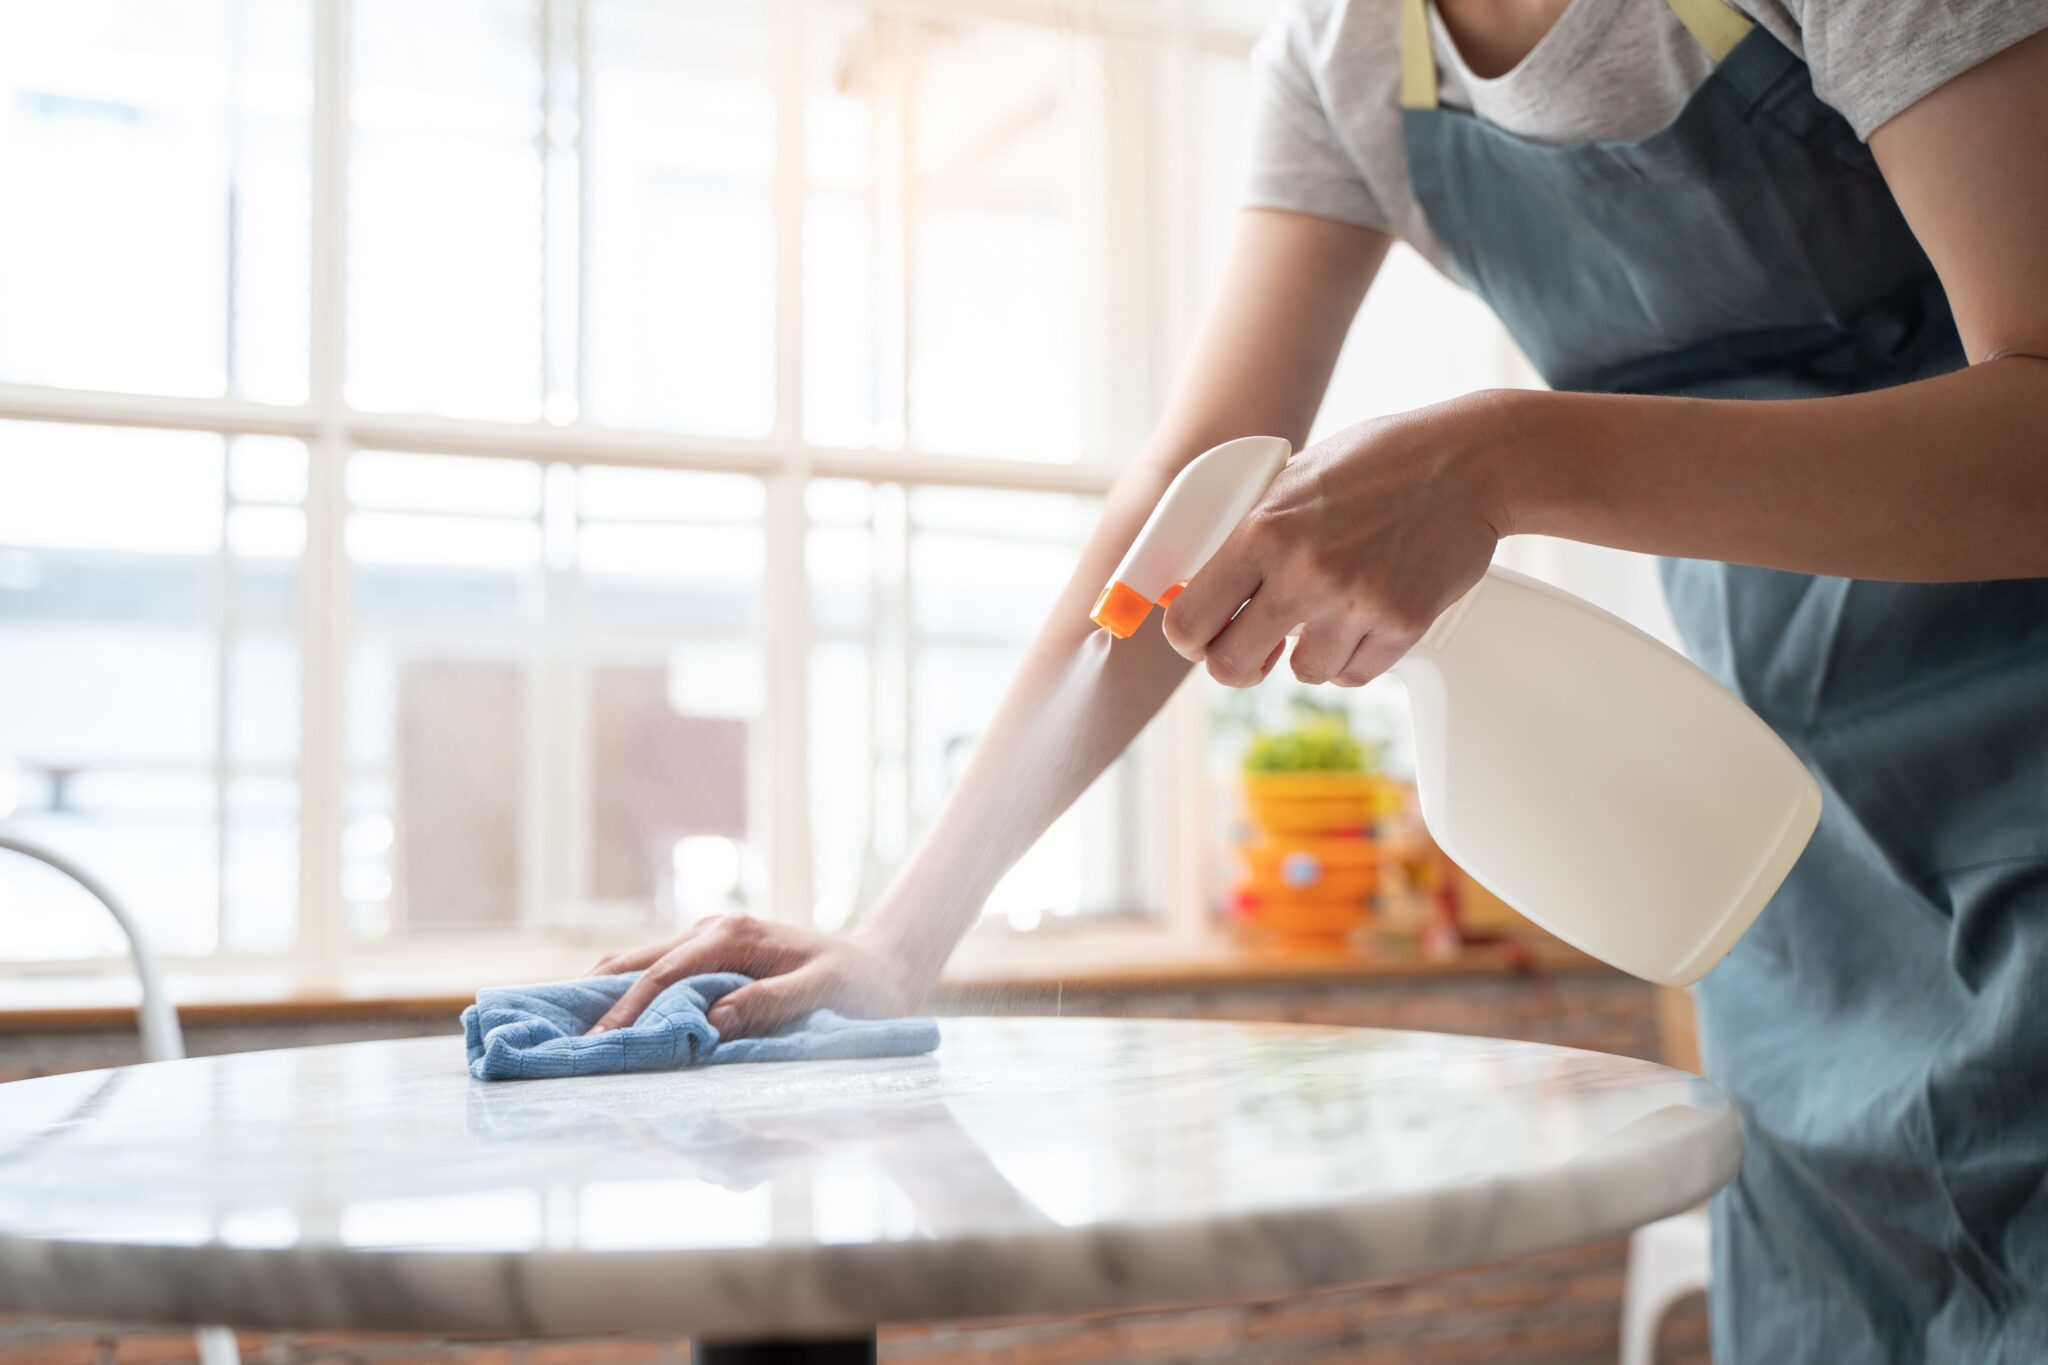 hire local cleaning company for house cleaning